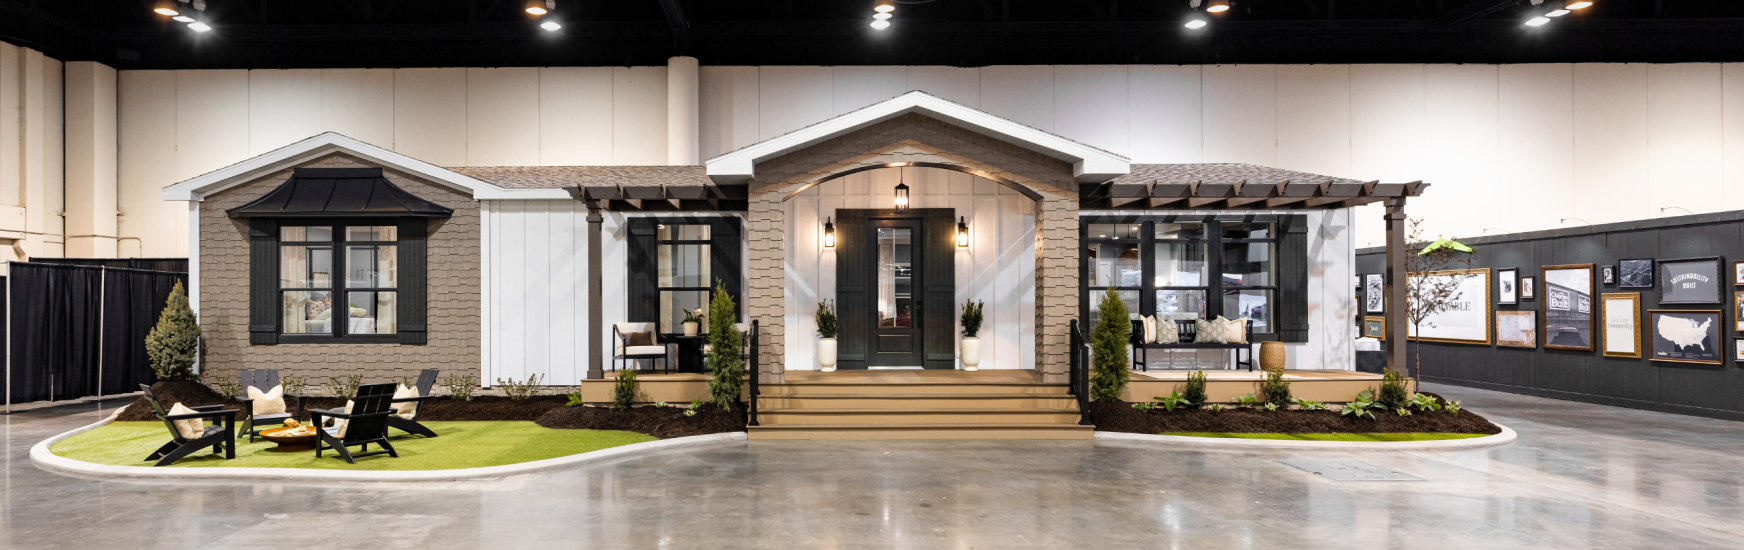 Exterior image of a modern manufactured home with coastal features and an arched entryway. 